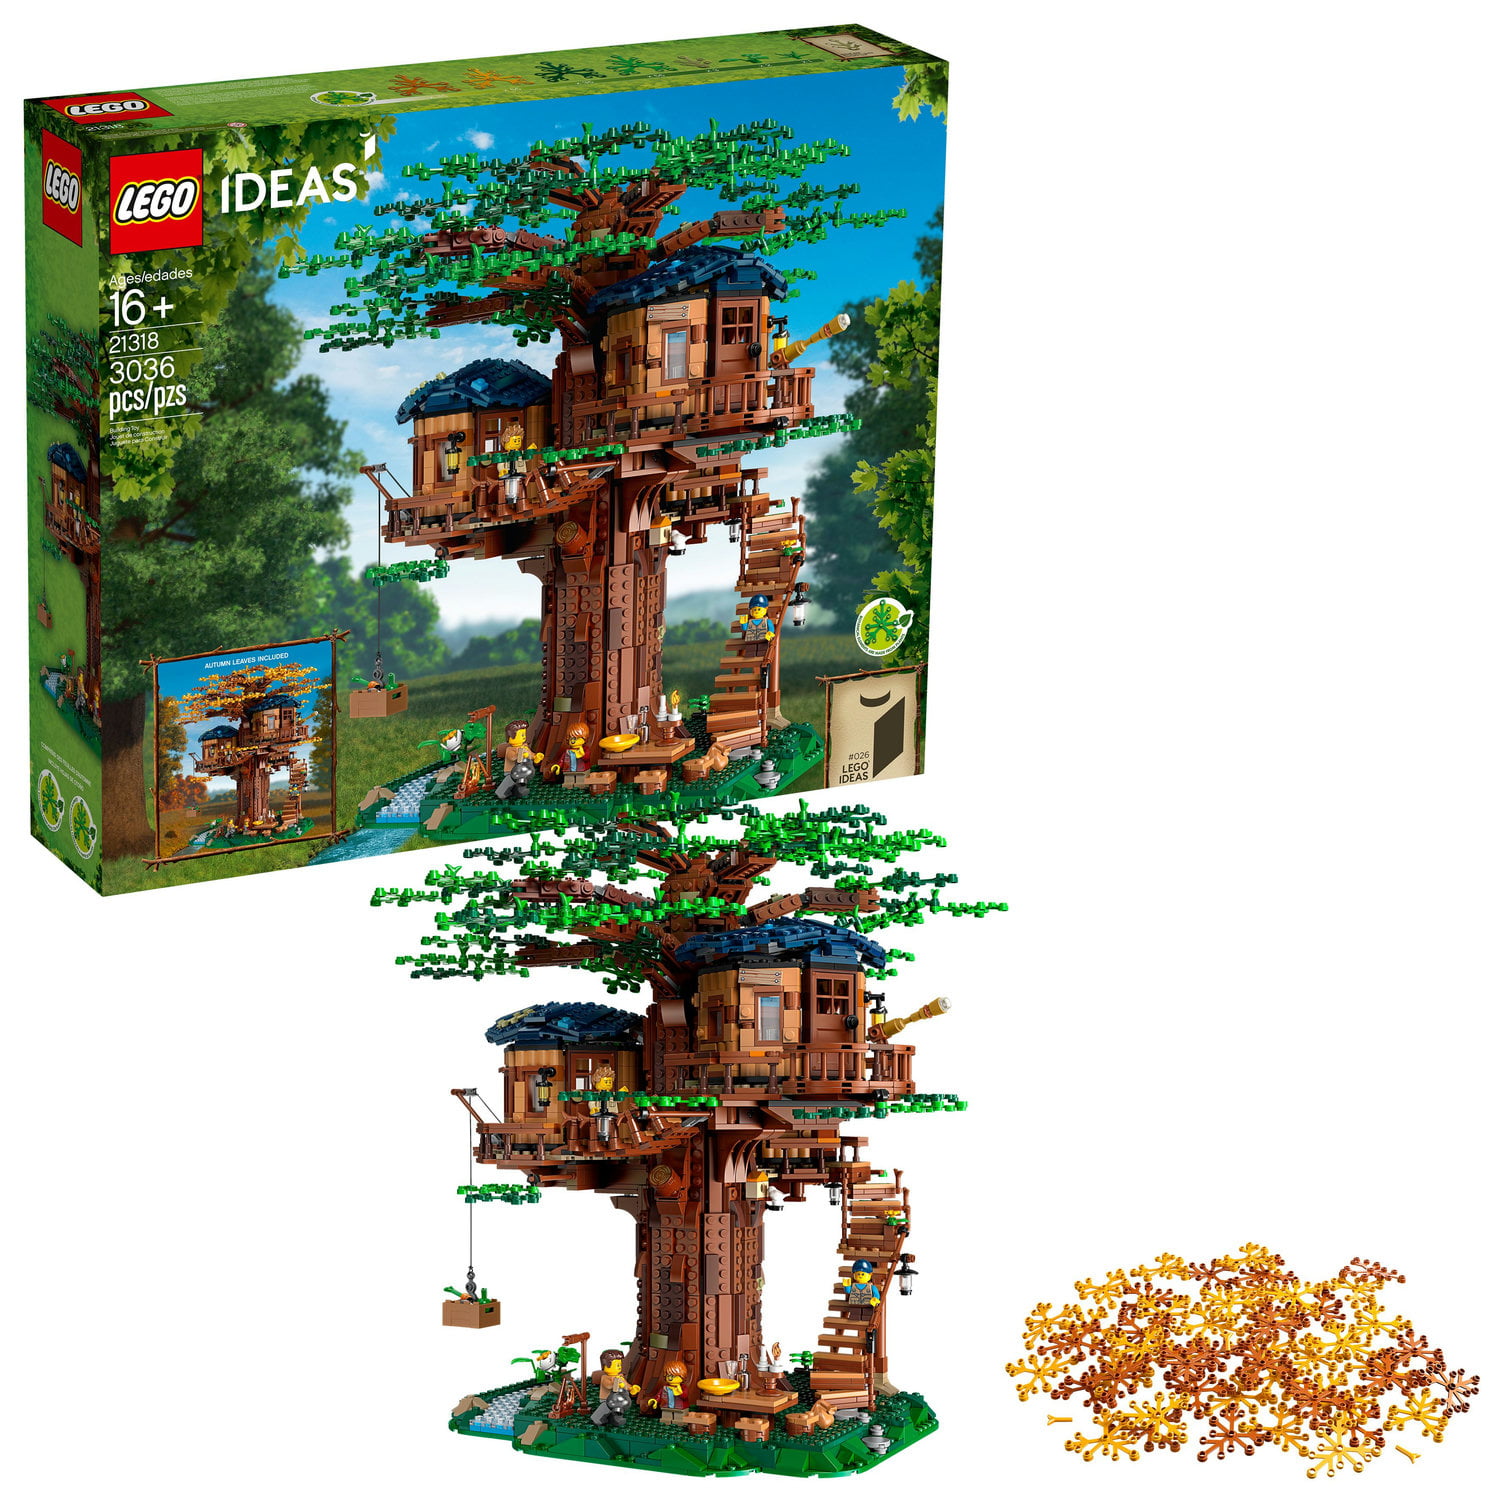 Wooden Puzzles TREE HOUSE craft GIFT music box FOR KIDS BOYS AND GIRLS 